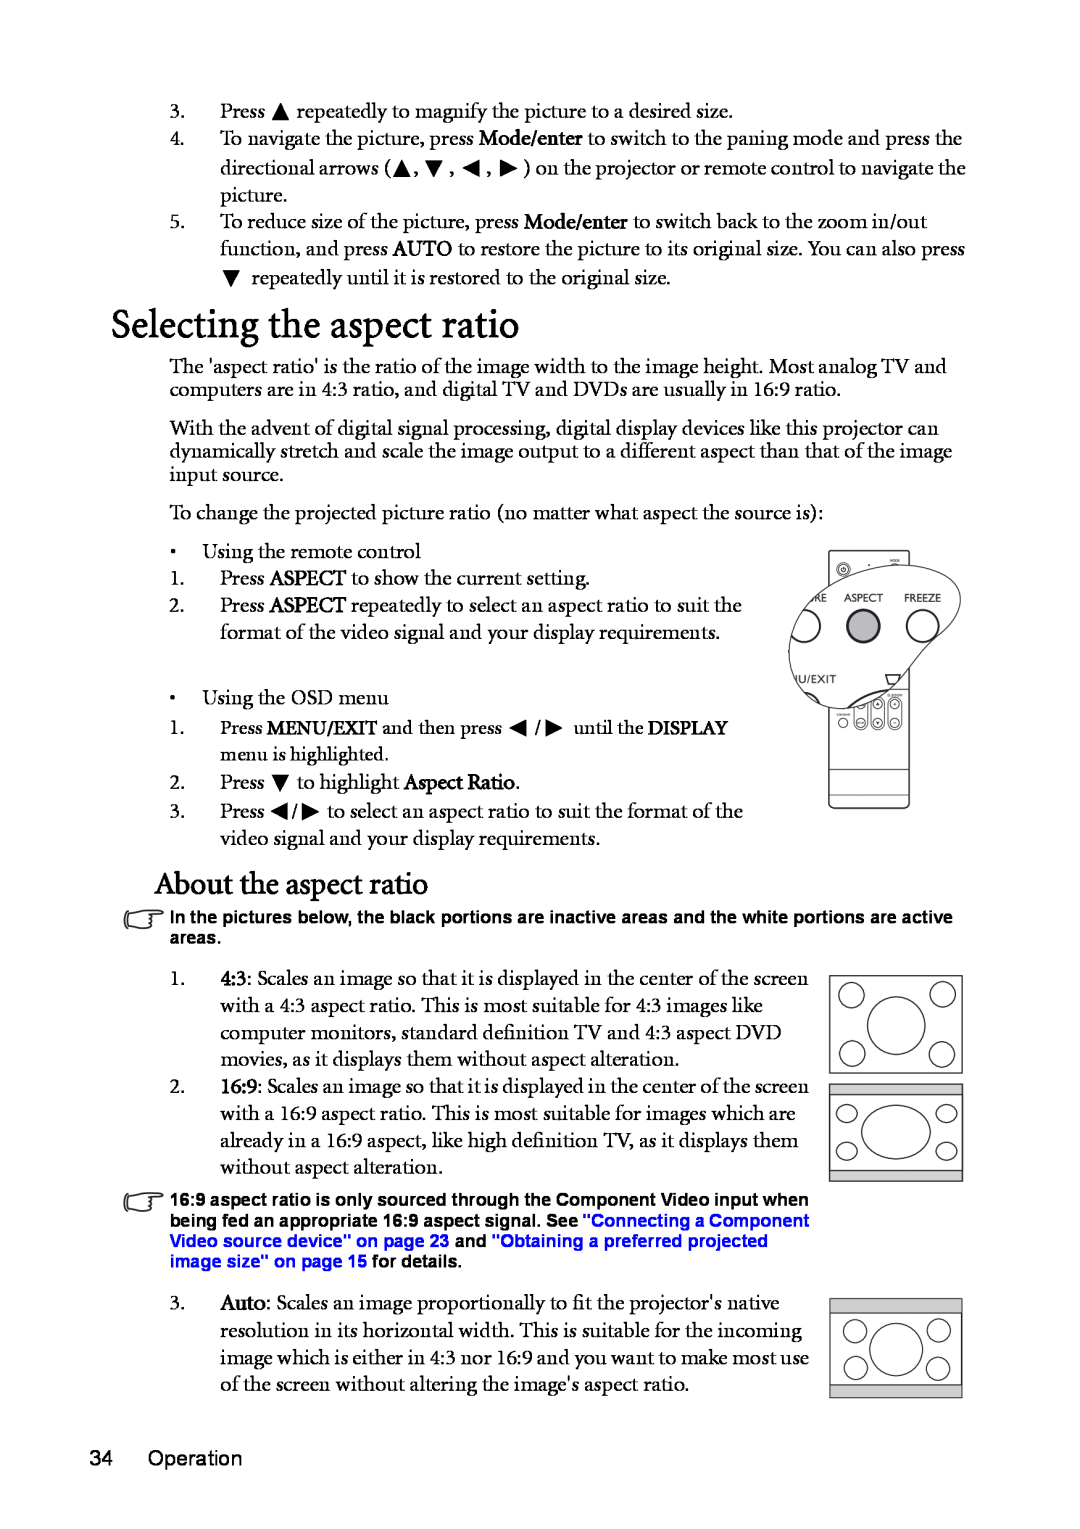 BenQ MP723 user manual Selecting the aspect ratio, About the aspect ratio 